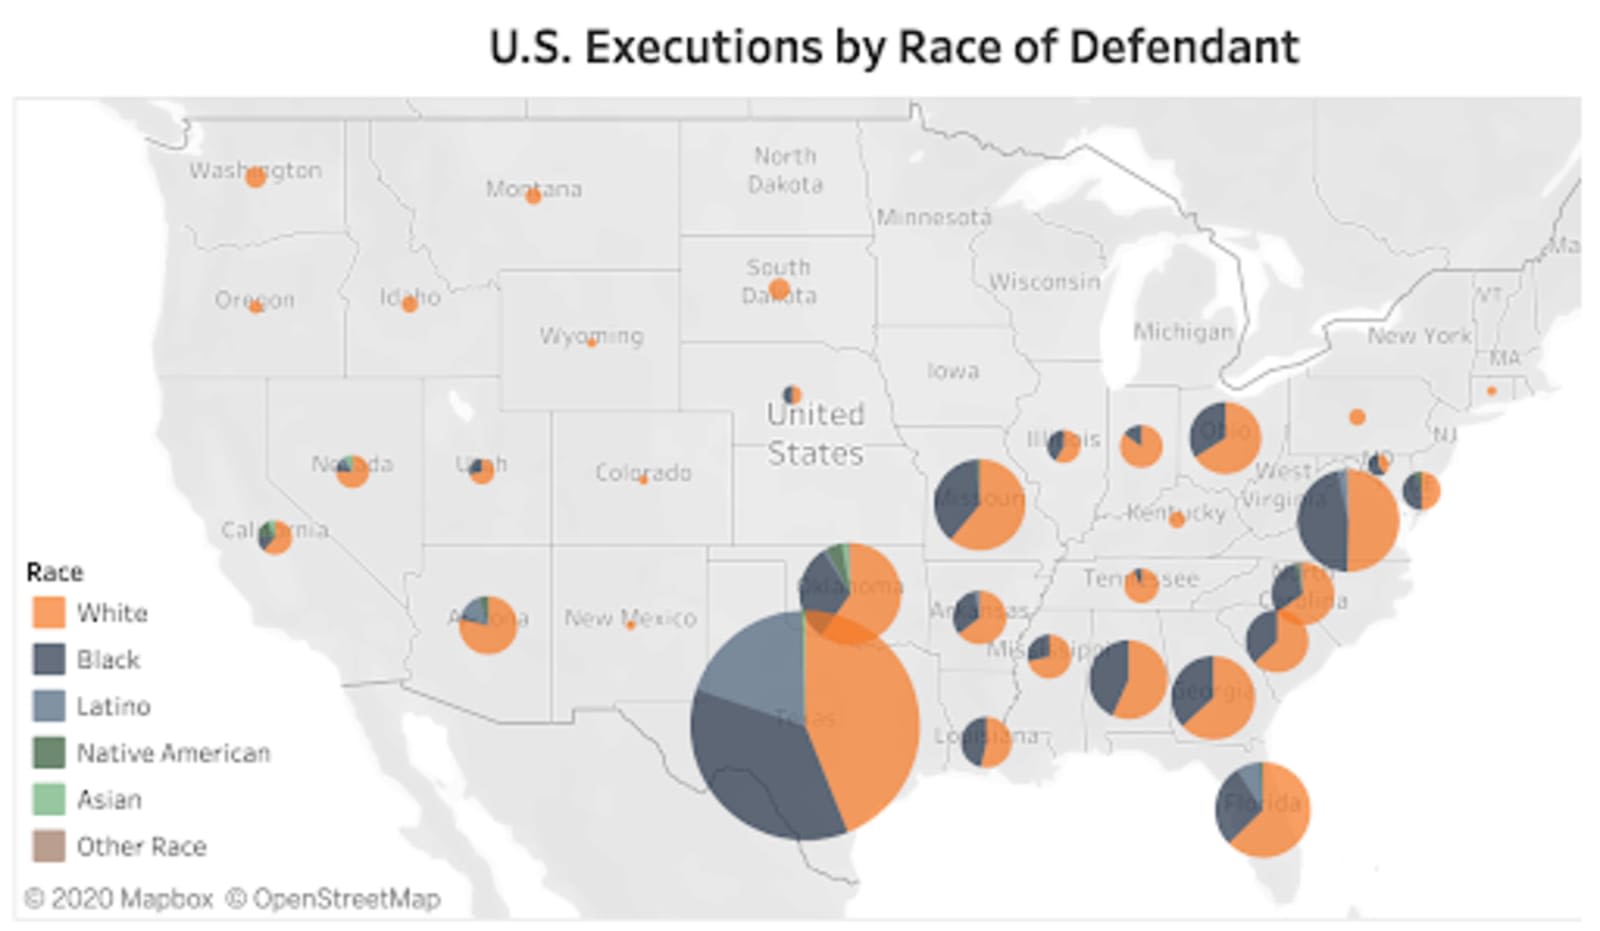 Black Americans make up just 12% of the US population, but they make up 44% of the prisoners that state governments plan to execute. Image from Death Penalty Information Center